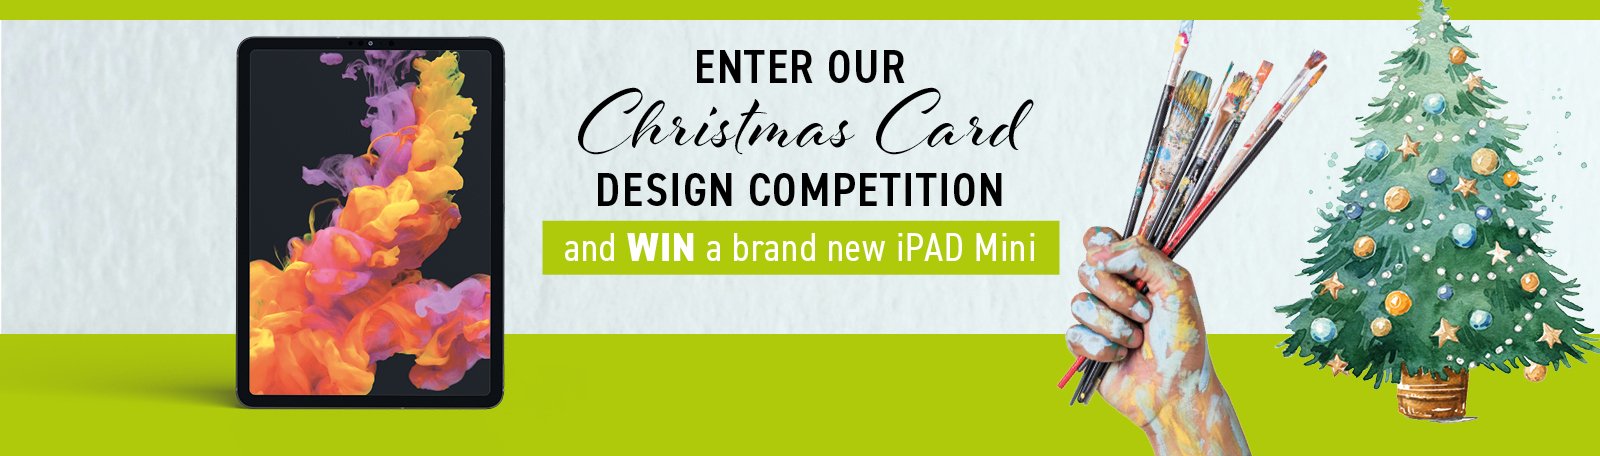 Christmas Card Design Competition Launched